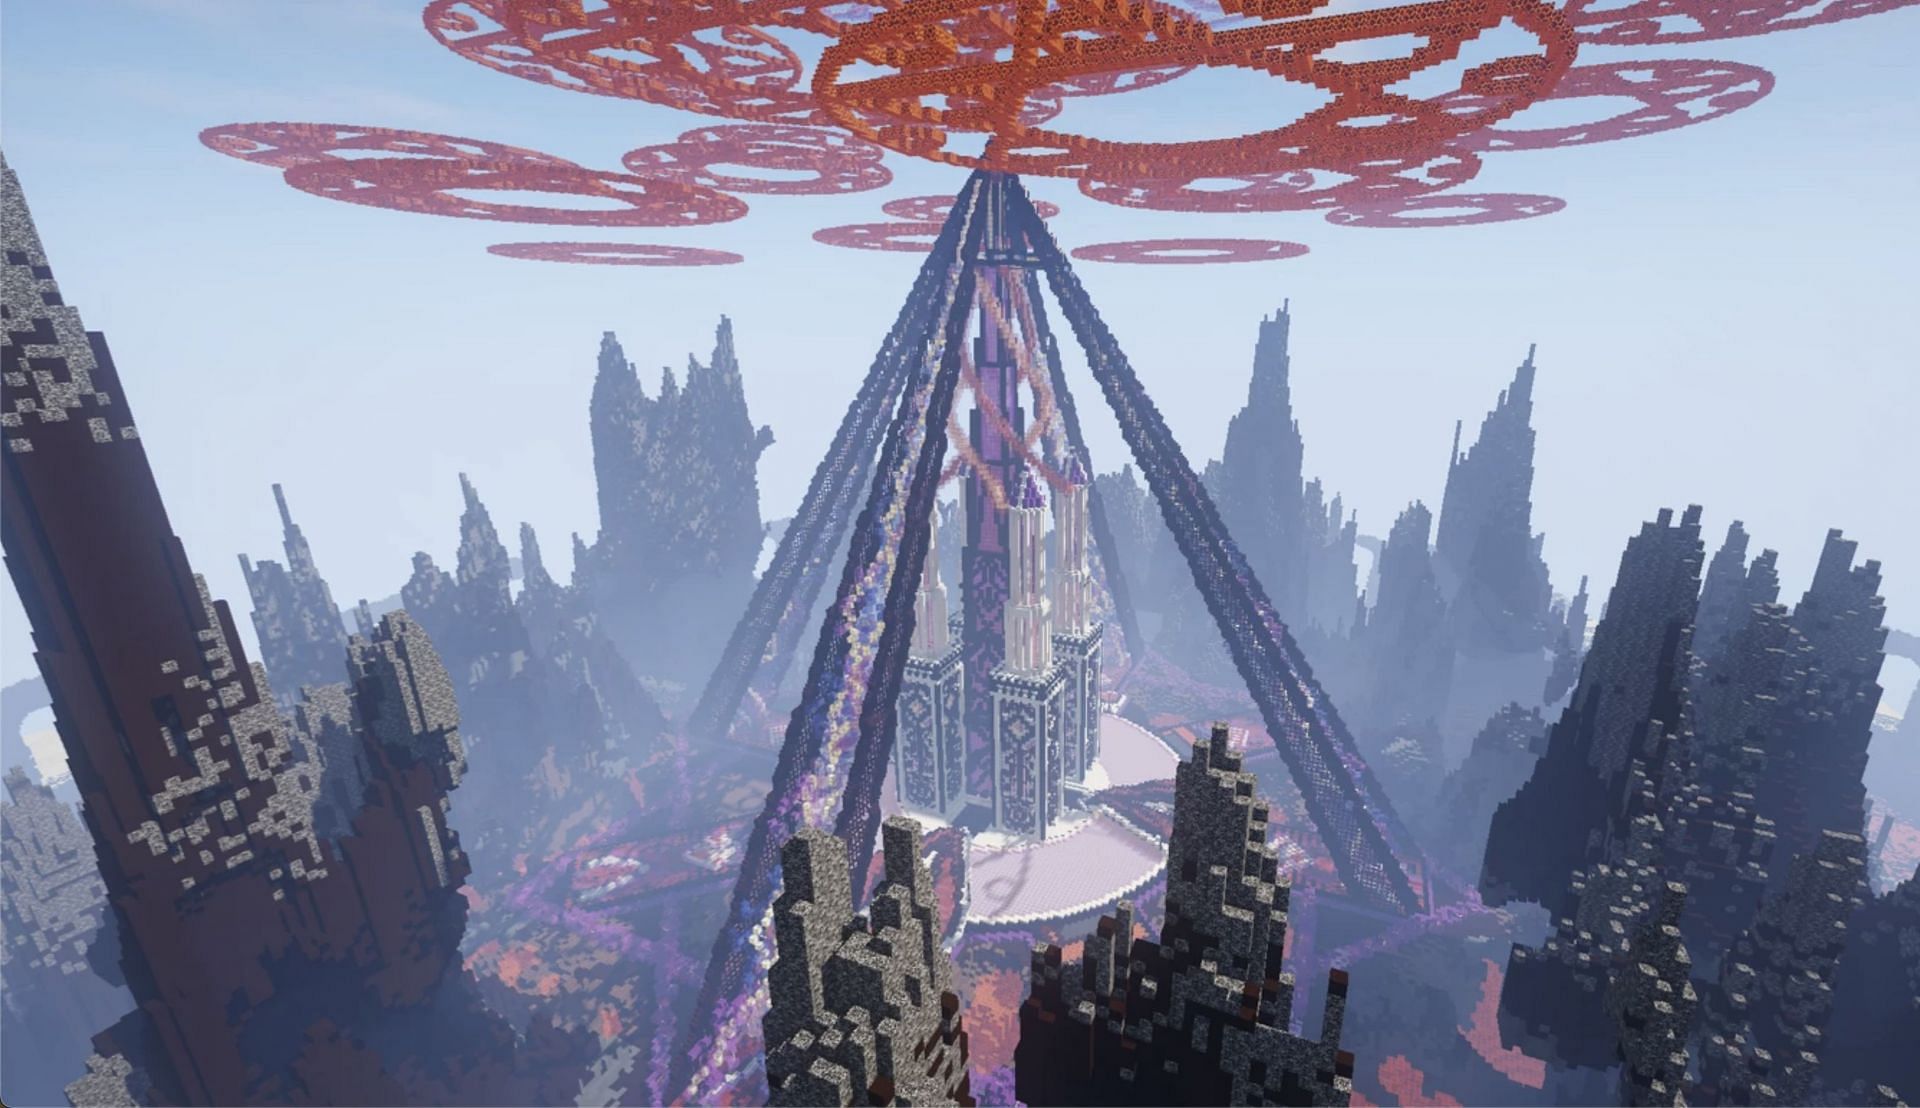 EuForia Creation Worlds: The Nether Portal by EuForia_AlHaQ ((Image via Twitter by EuForia_AlHaQ)